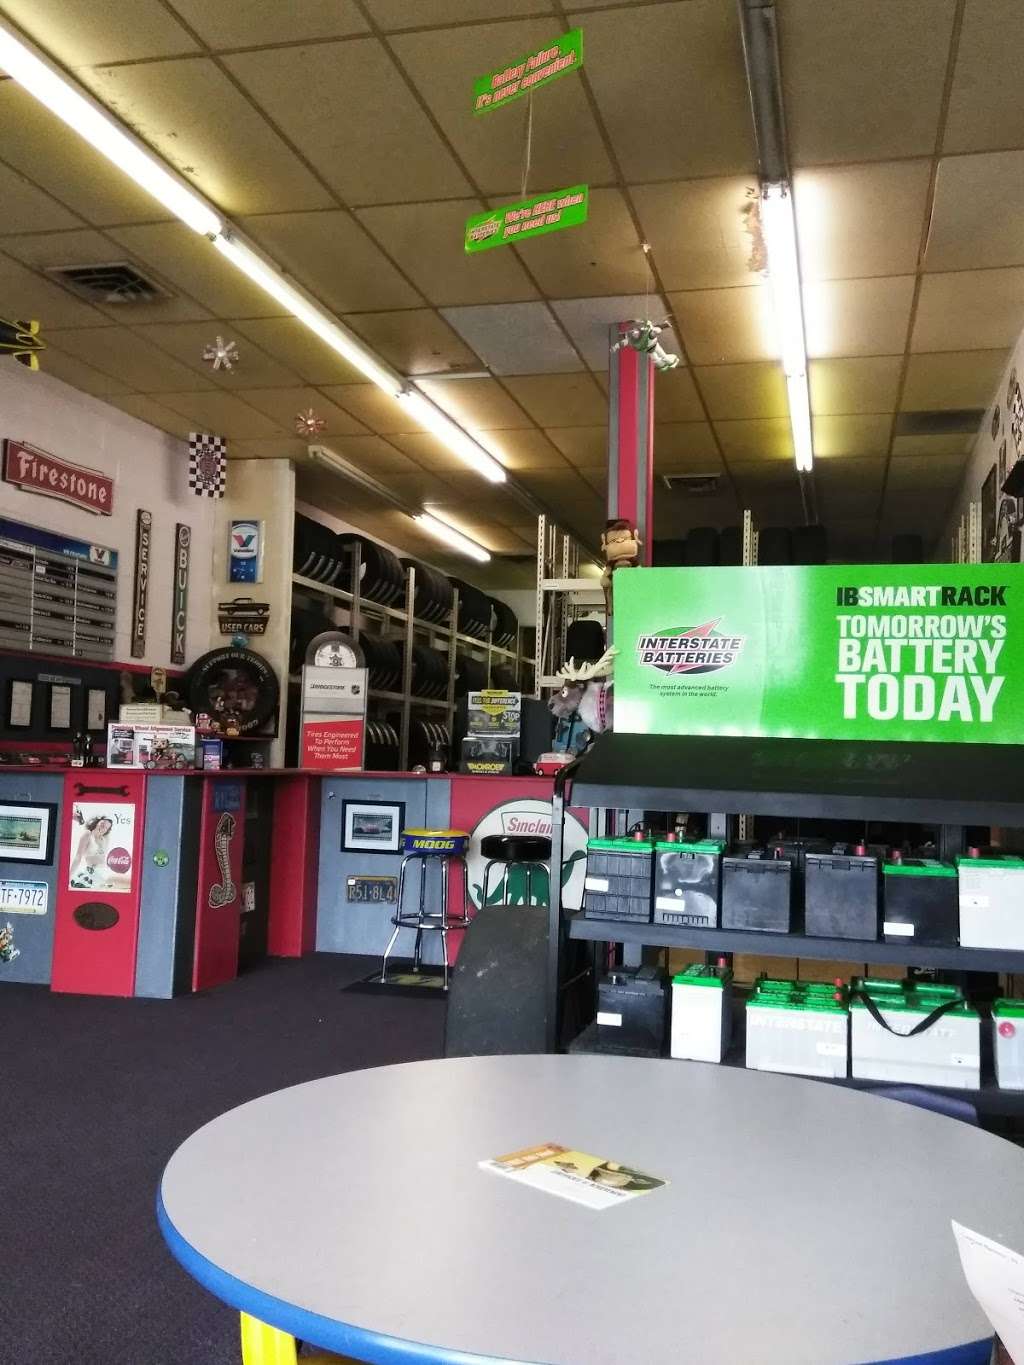 Wolfes New Oxford Auto Center | 330 Lincoln Way E, New Oxford, PA 17350, USA | Phone: (717) 624-7306